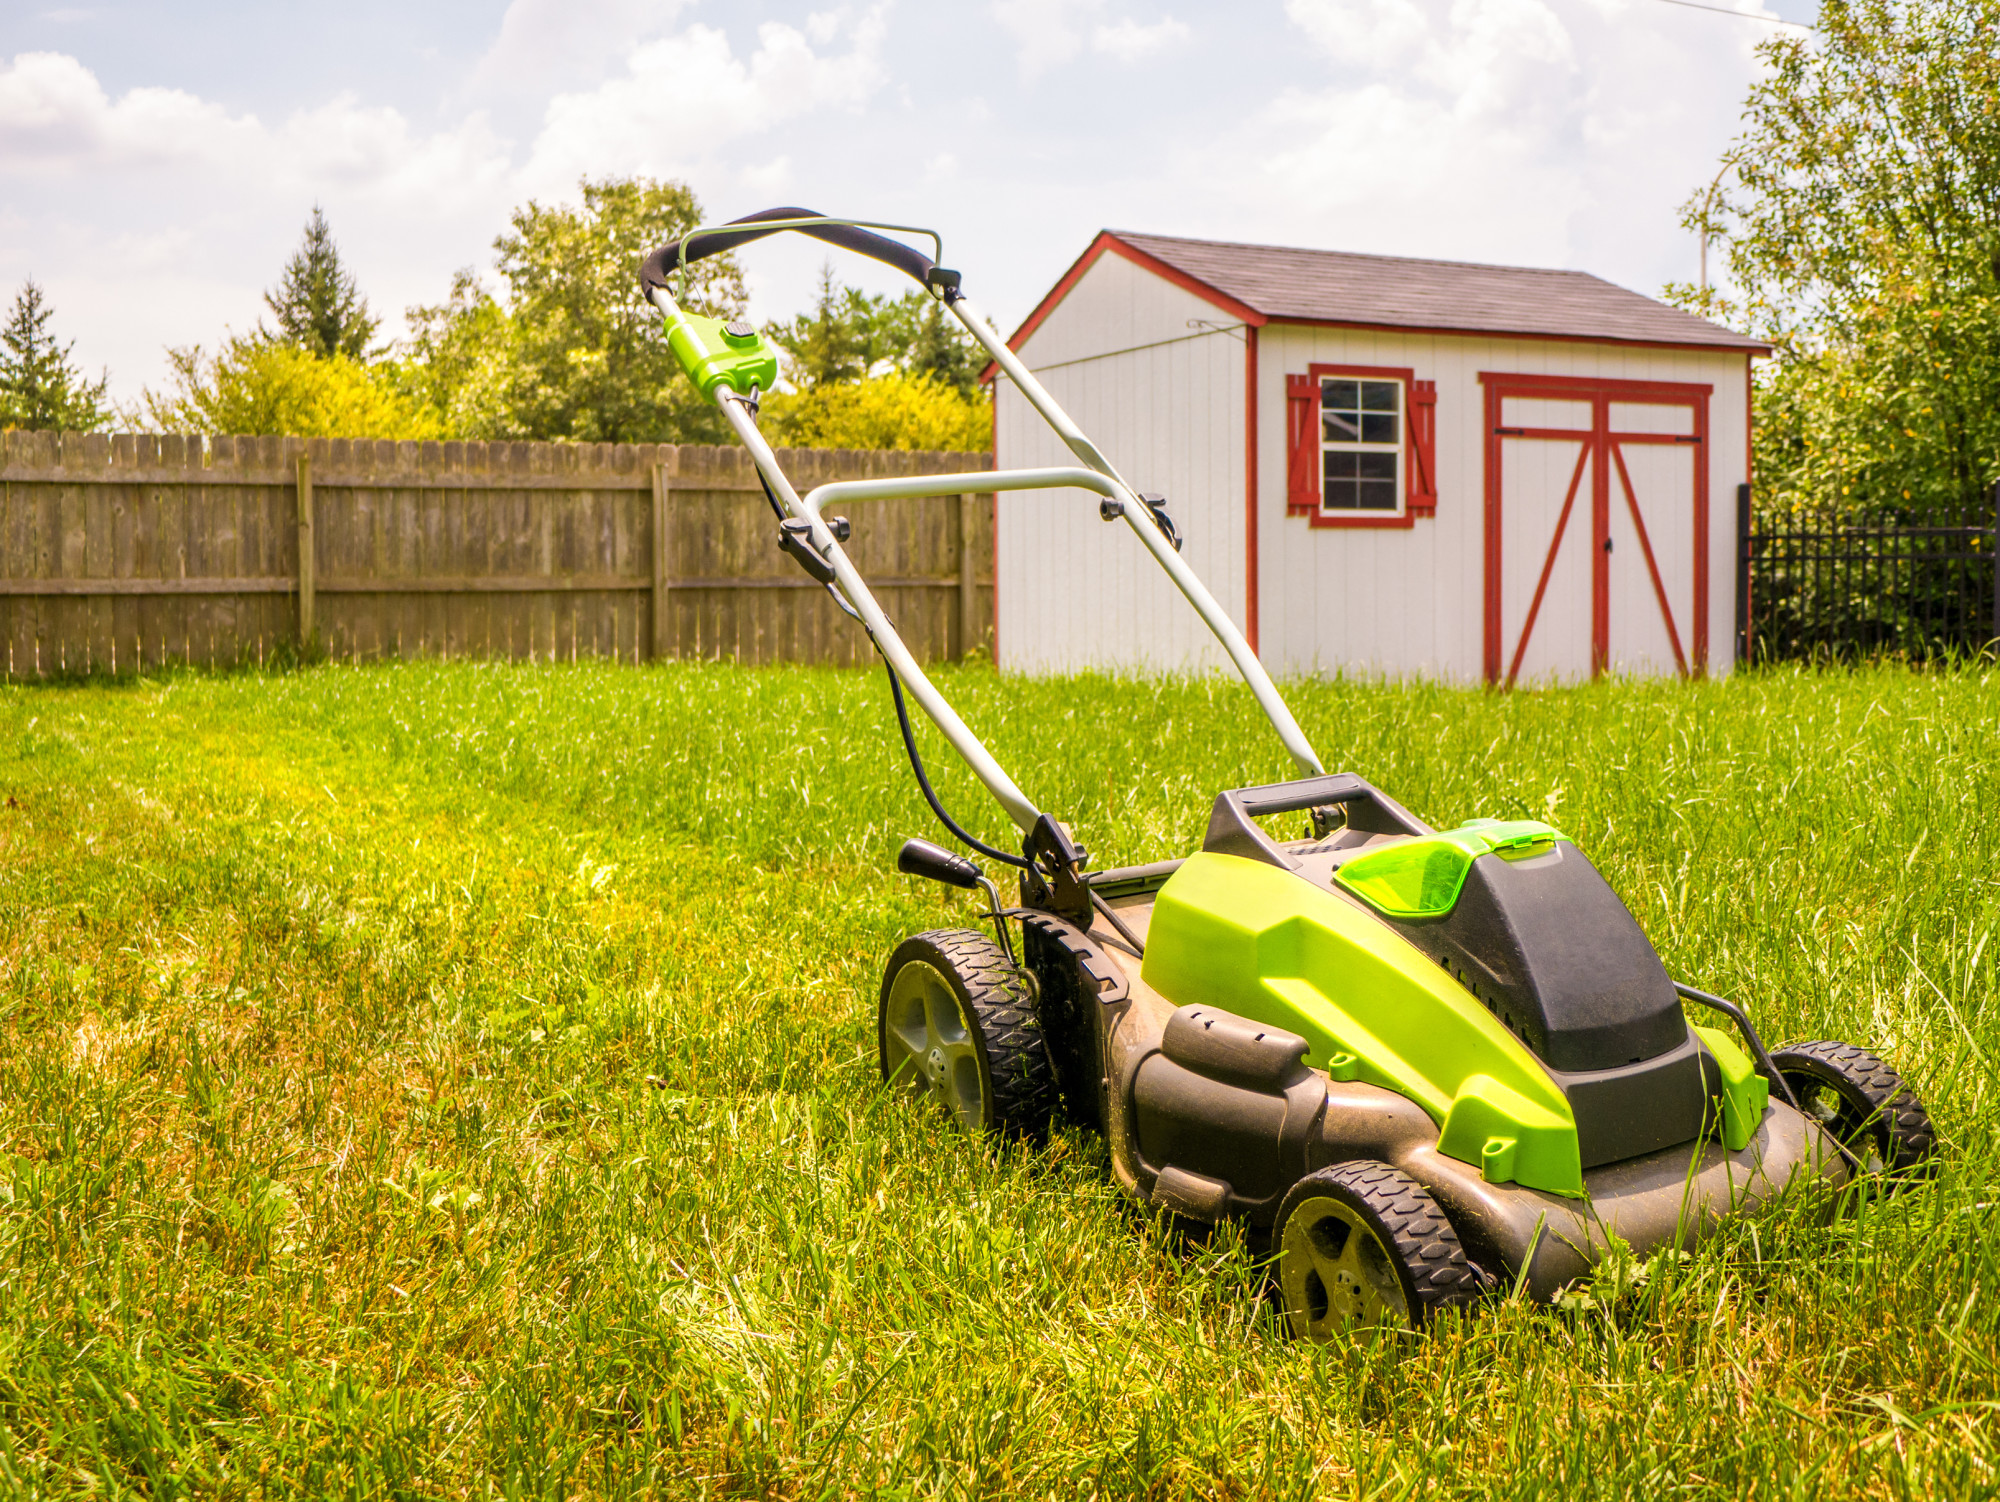 How to Choose an Environmentally Friendly Electric Lawn Mower